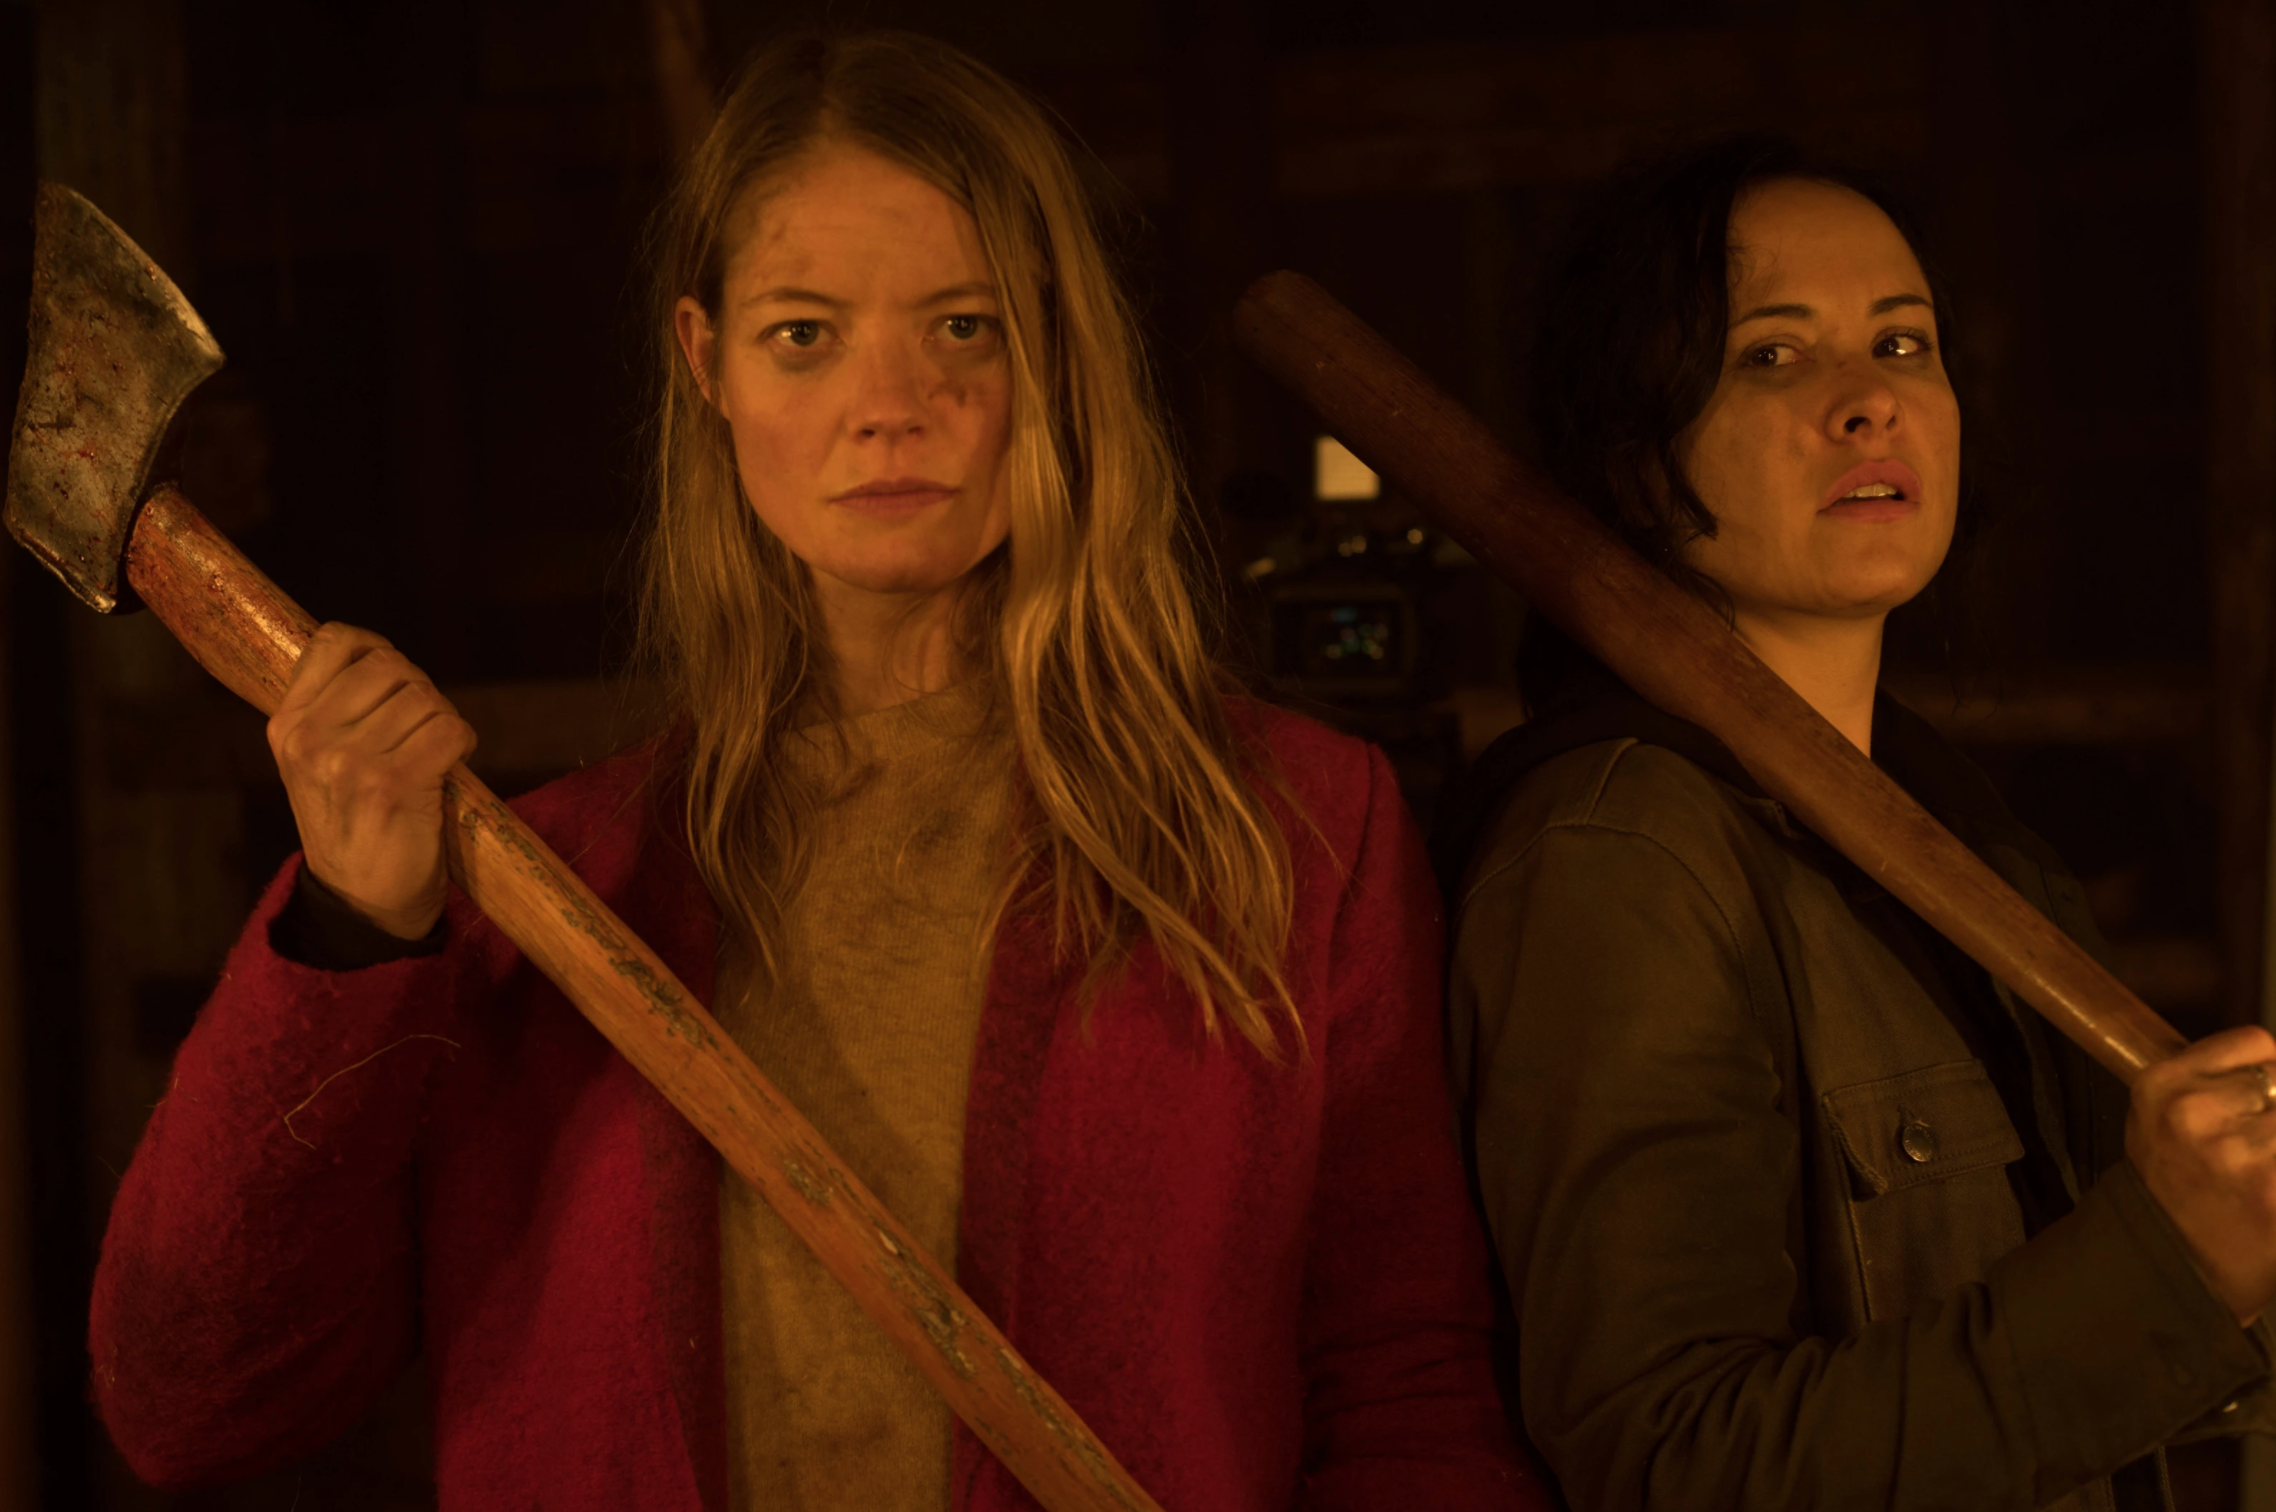 Queerly Not Straight: Interview with Alyson Richards, Writer of The LGBTQ Slasher 'The Retreat'